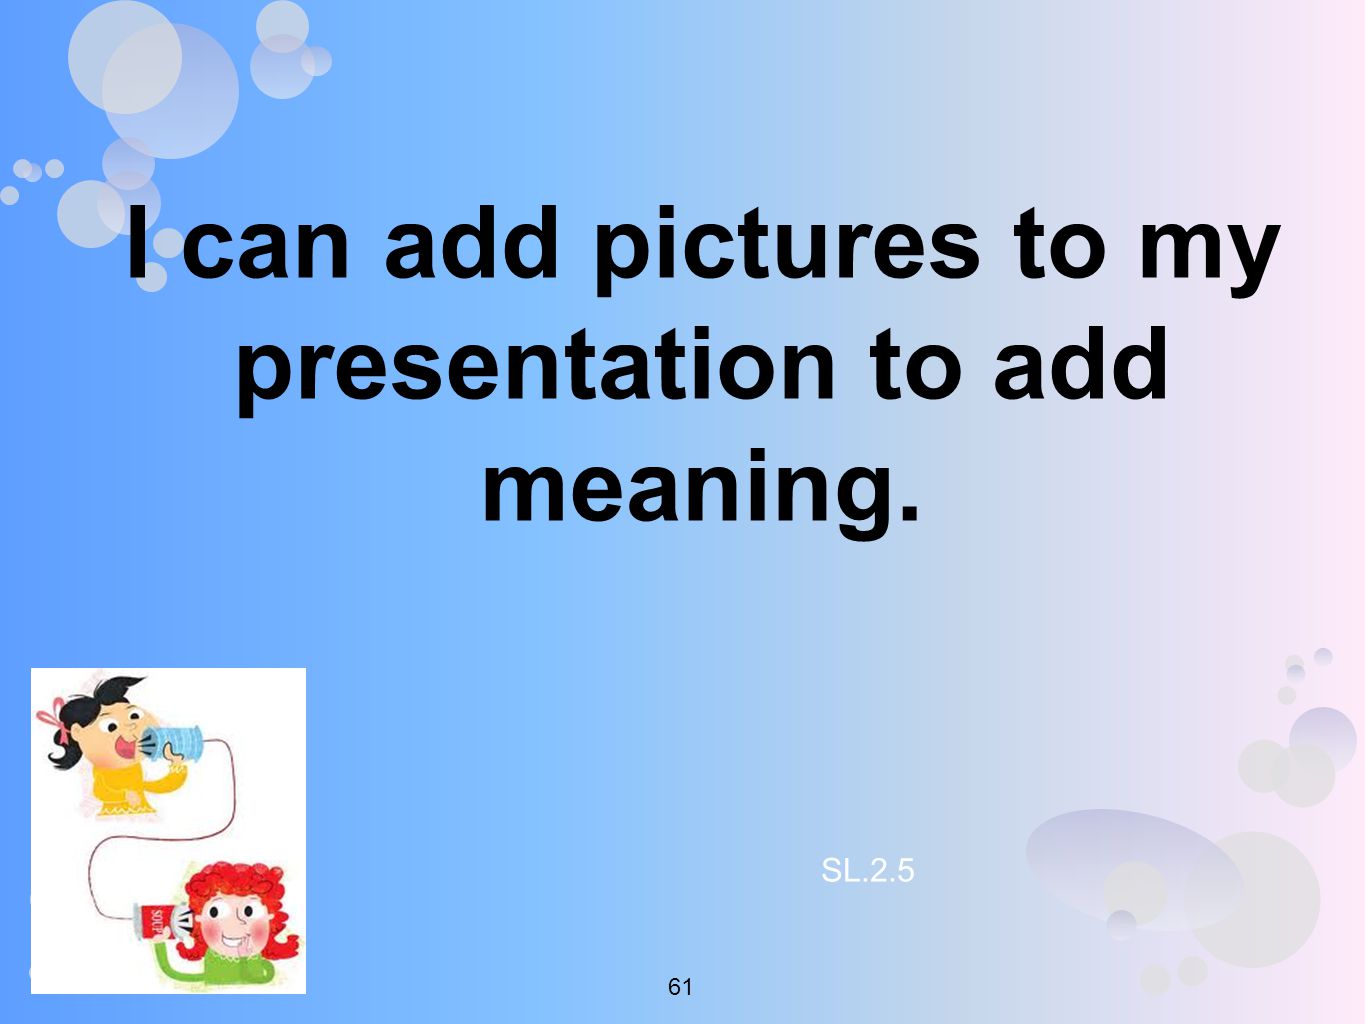 I can add pictures to my presentation to add meaning. SL